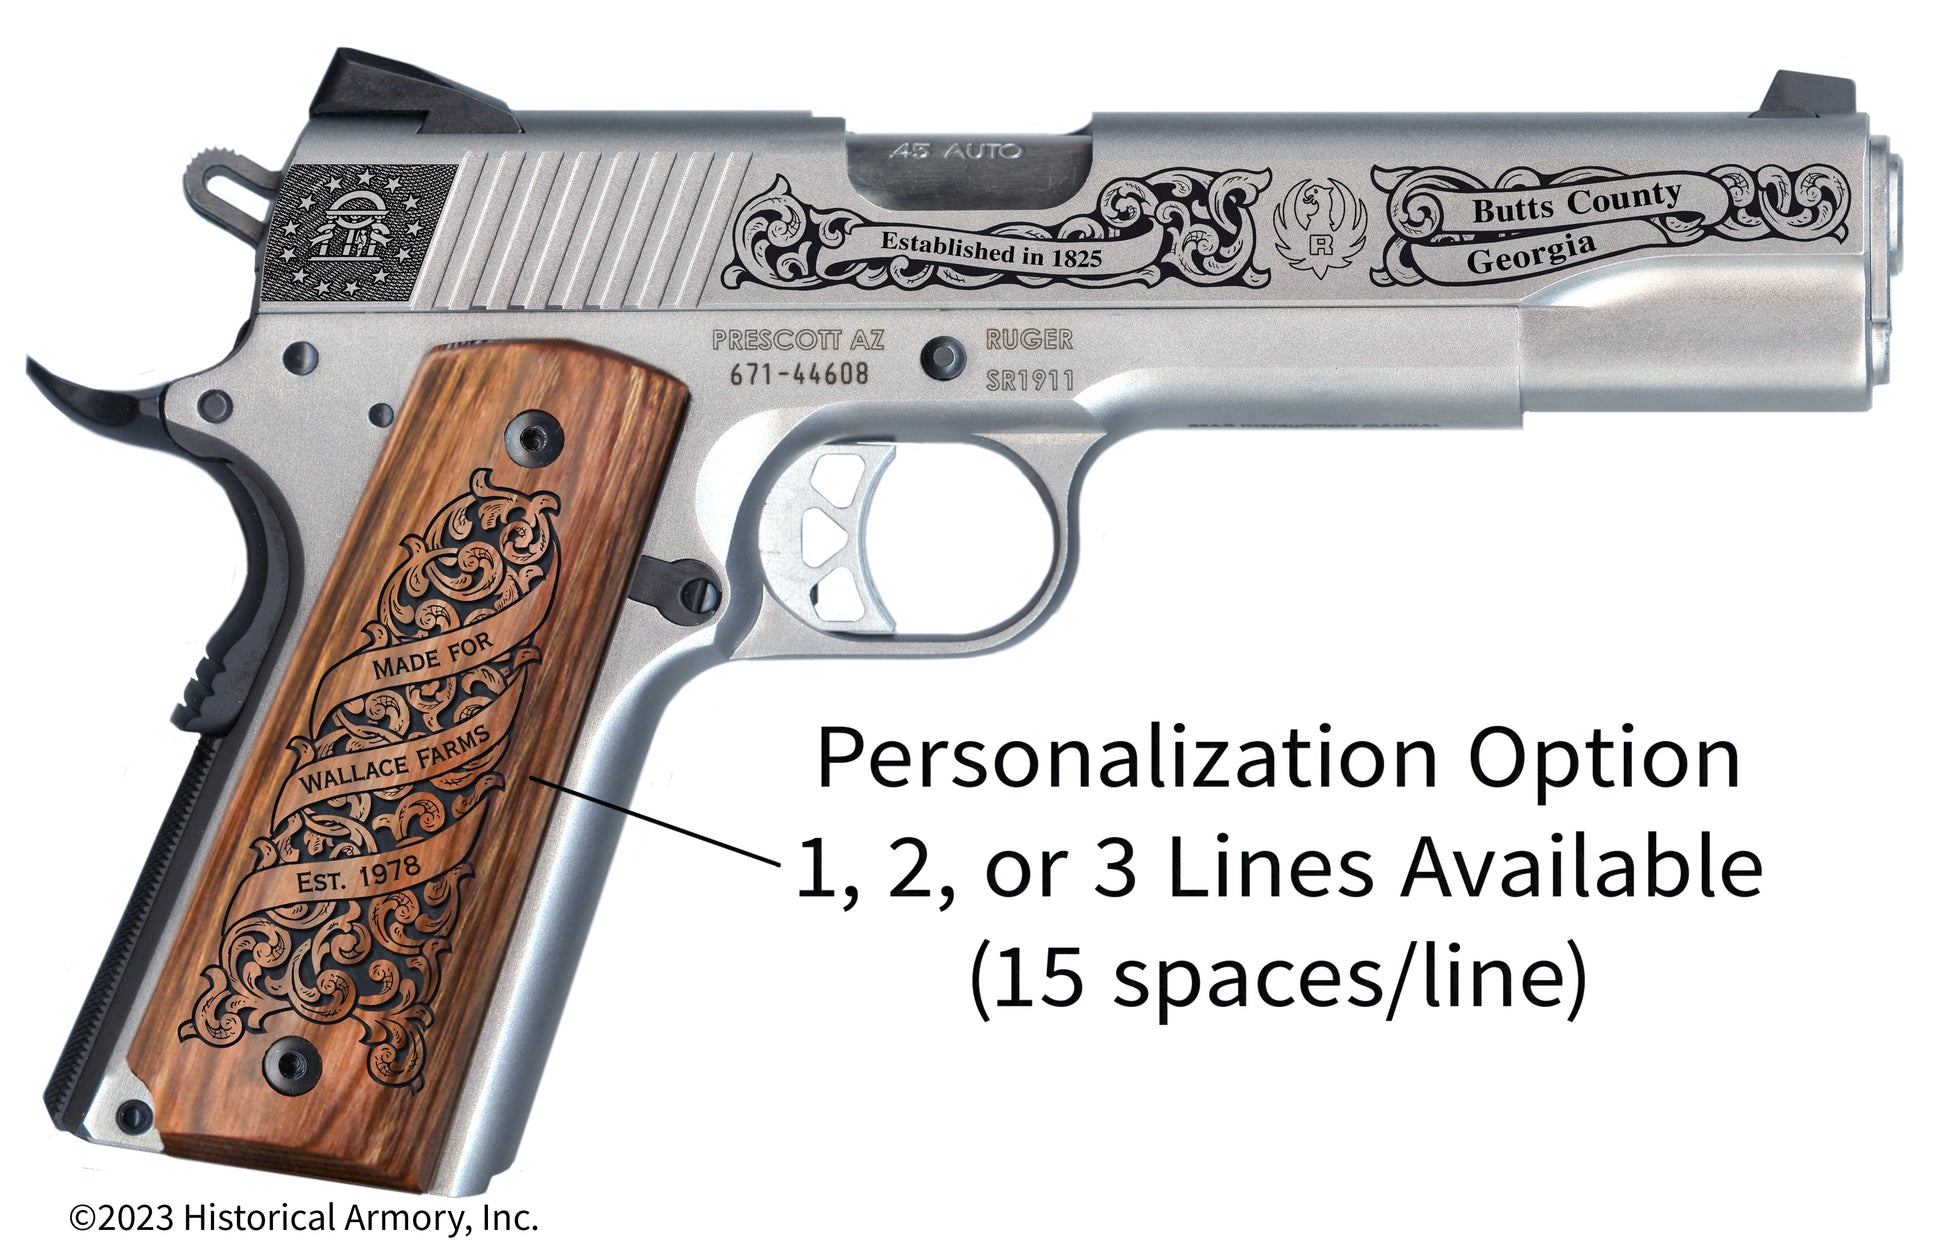 Butts County Georgia Personalized Engraved .45 Auto Ruger 1911